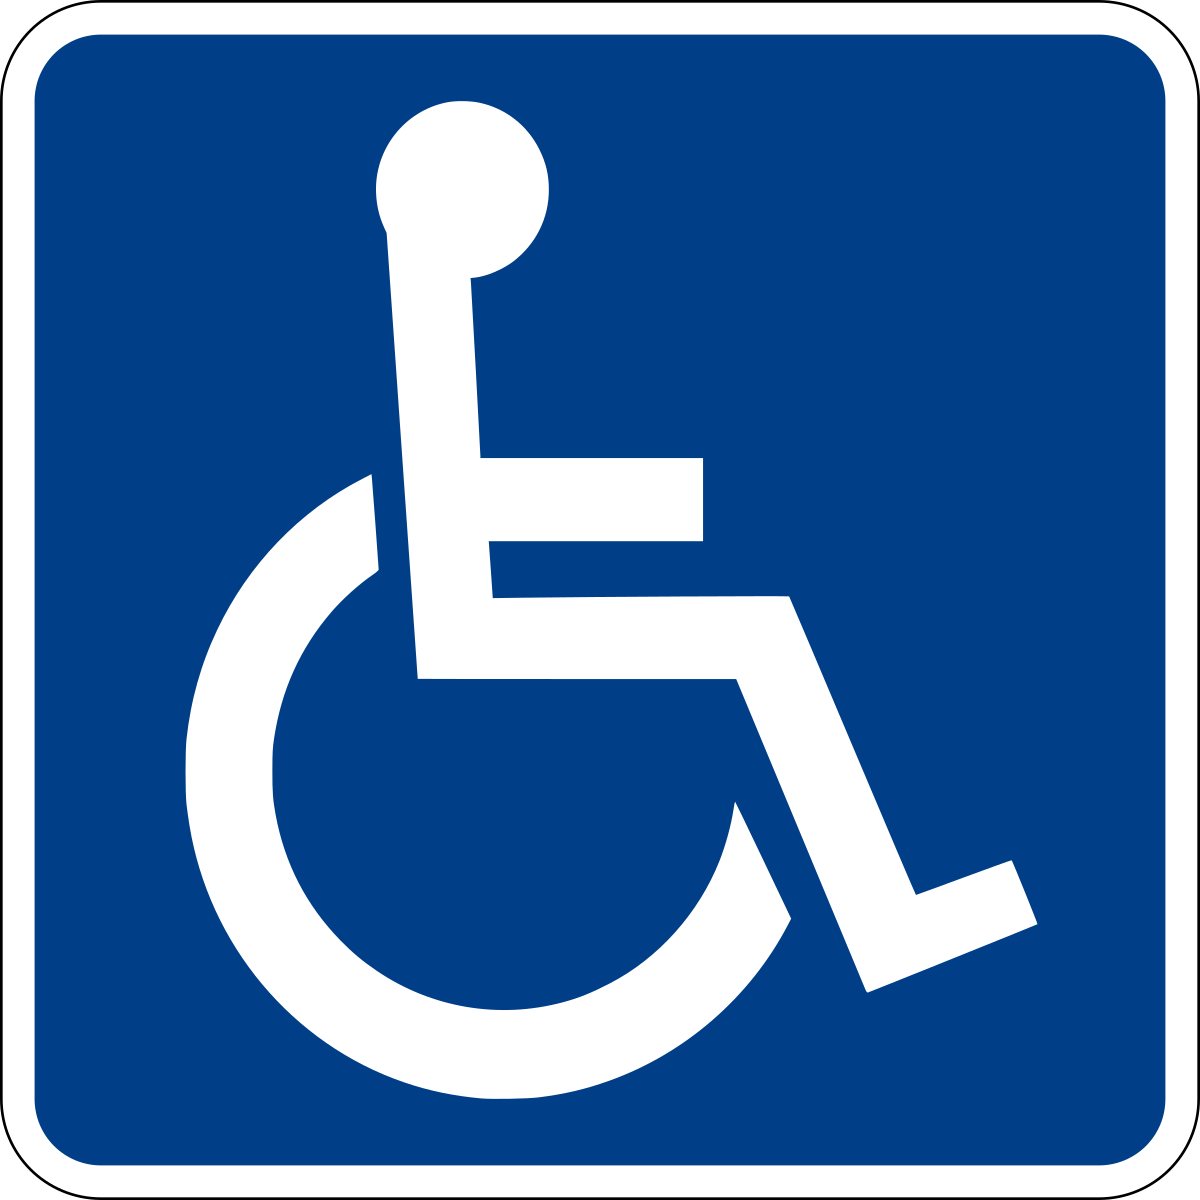 Disabled and a human being